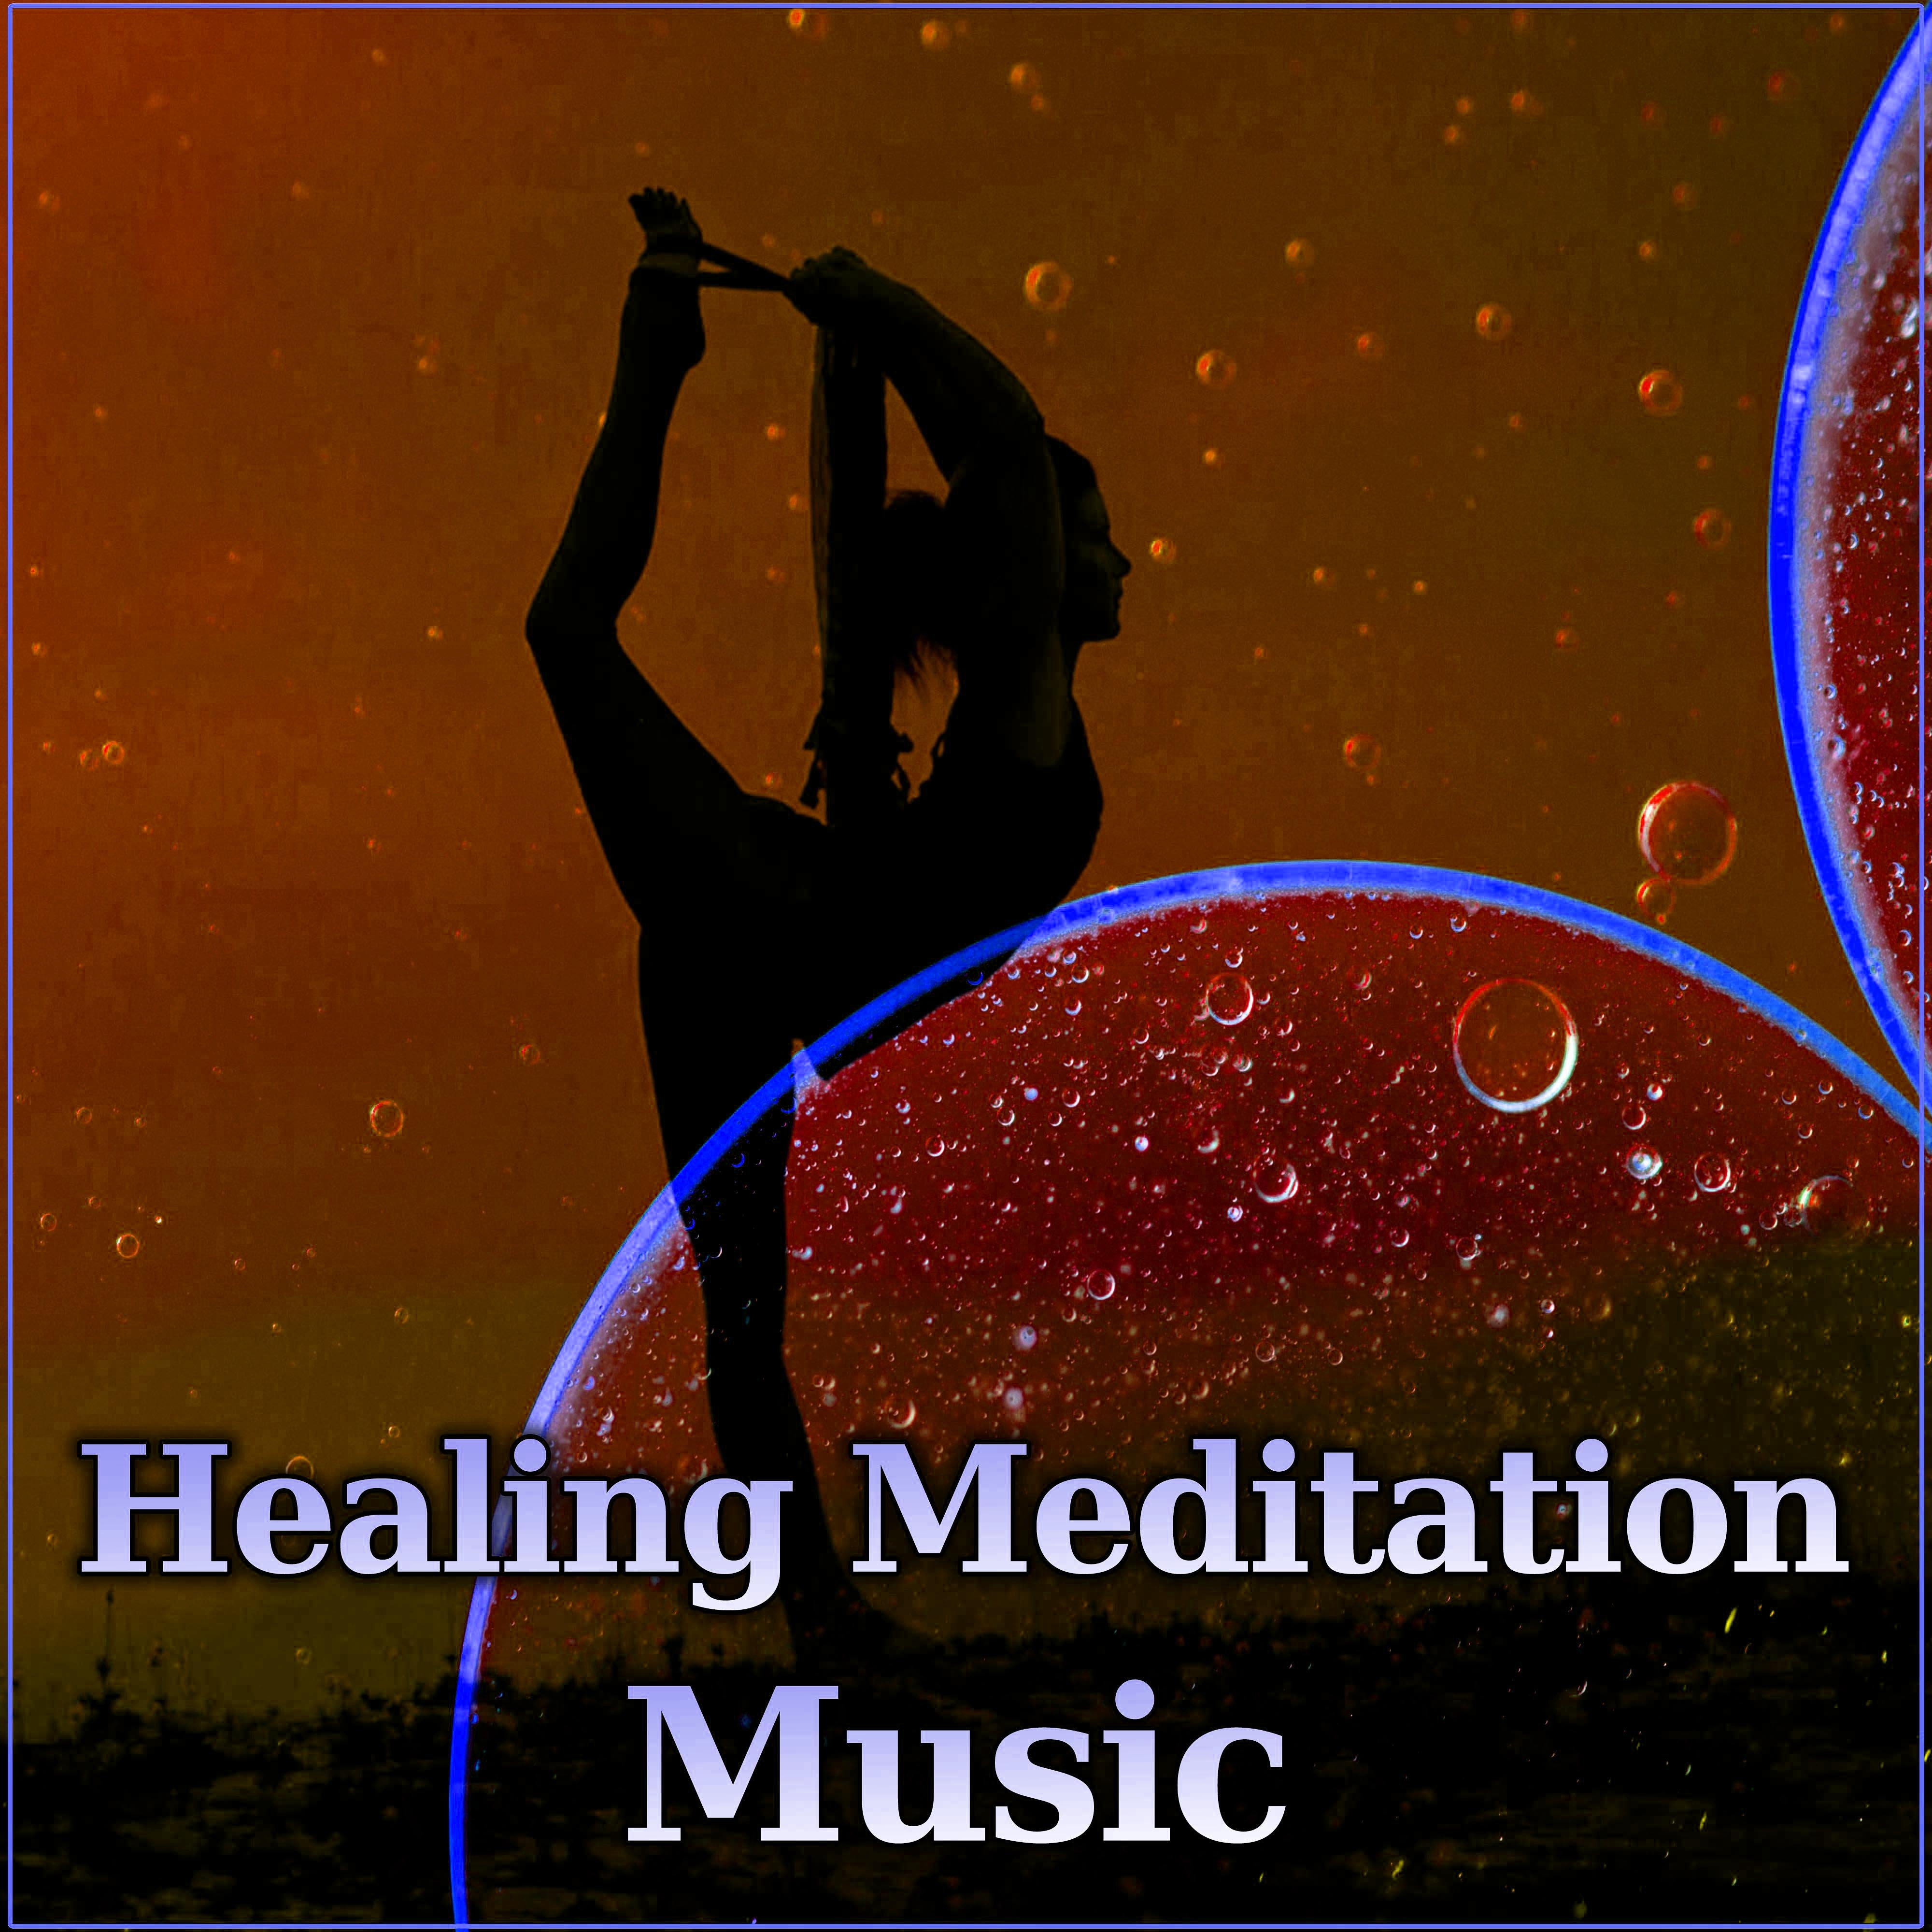 Healing Meditation Music – New Age Music for Yoga Exercises, Stress Relief, Mindfullness Healing Sounds, Meditation, Relax Nature Sounds